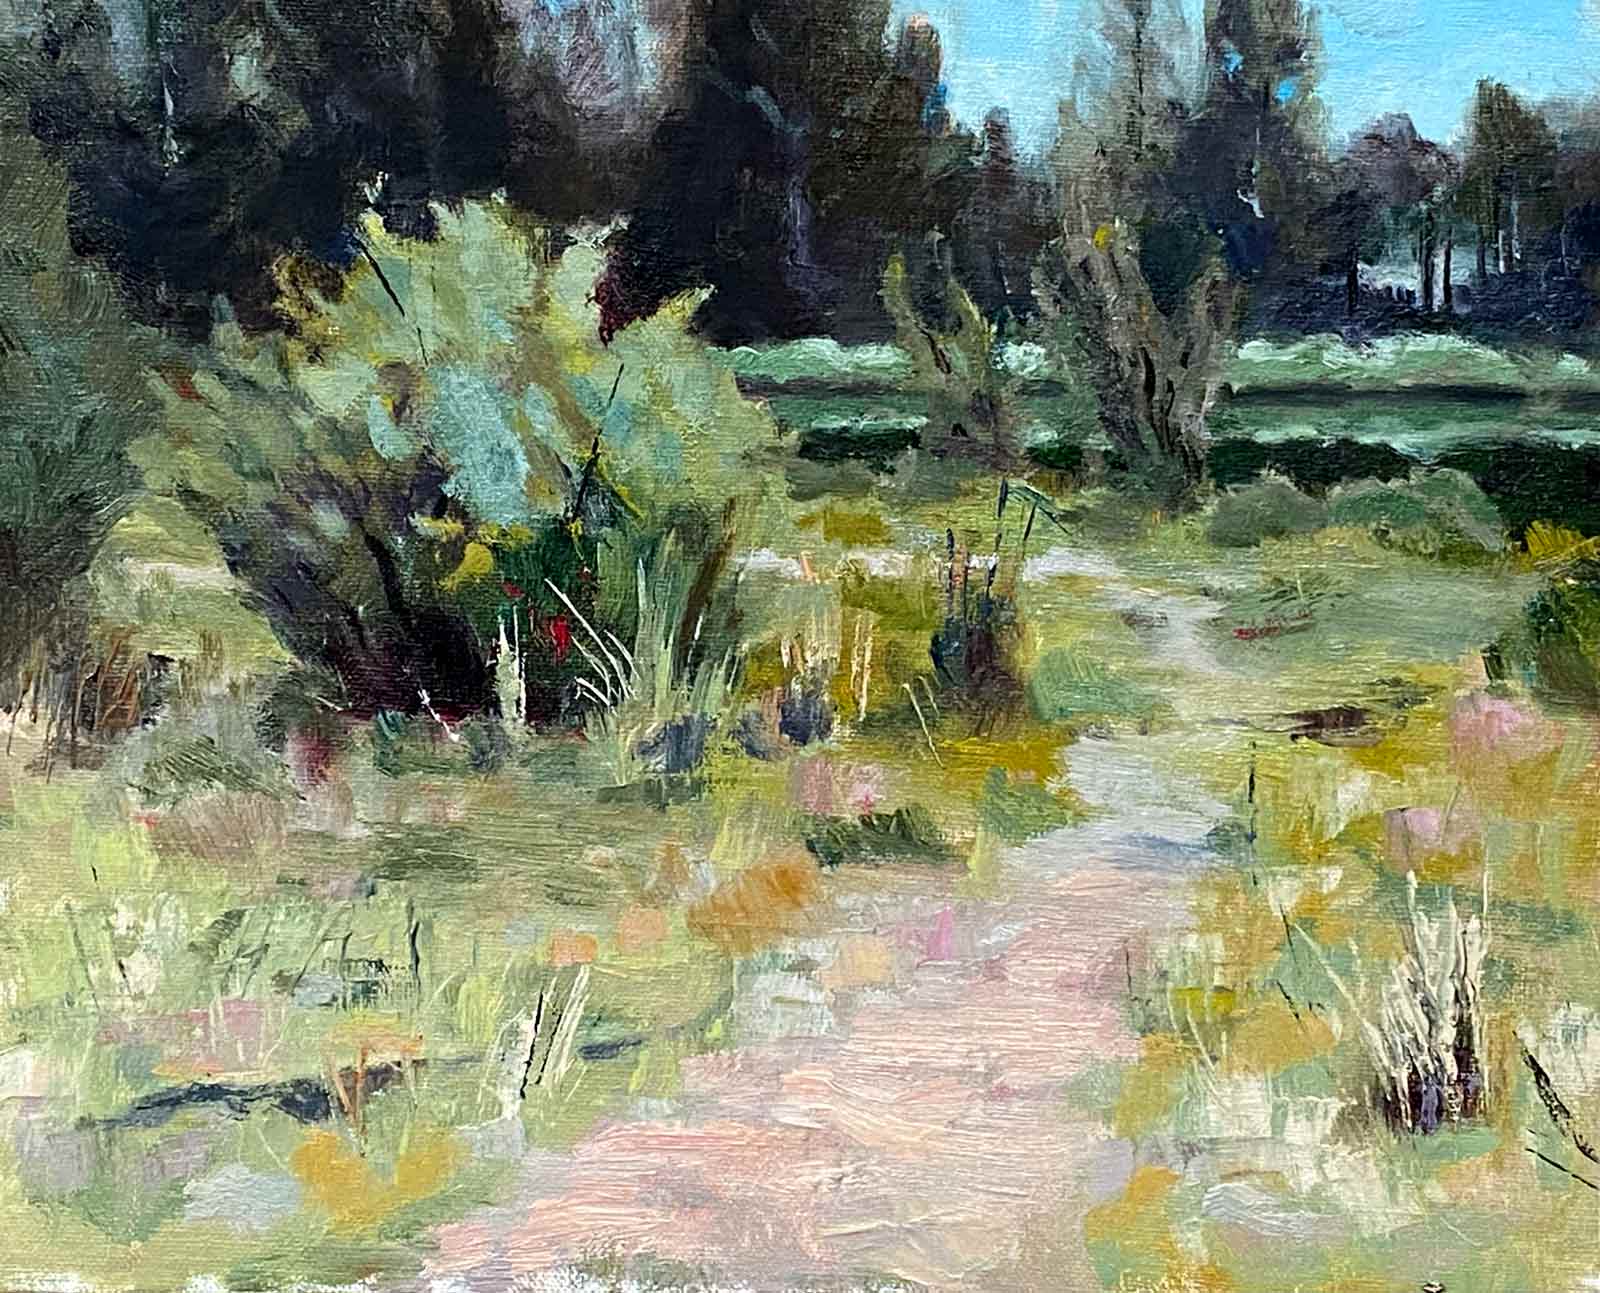 Oil impressionistic plein air painting along the Deschutes River in Oregon by American impressionist artist Shelly Wierzba.